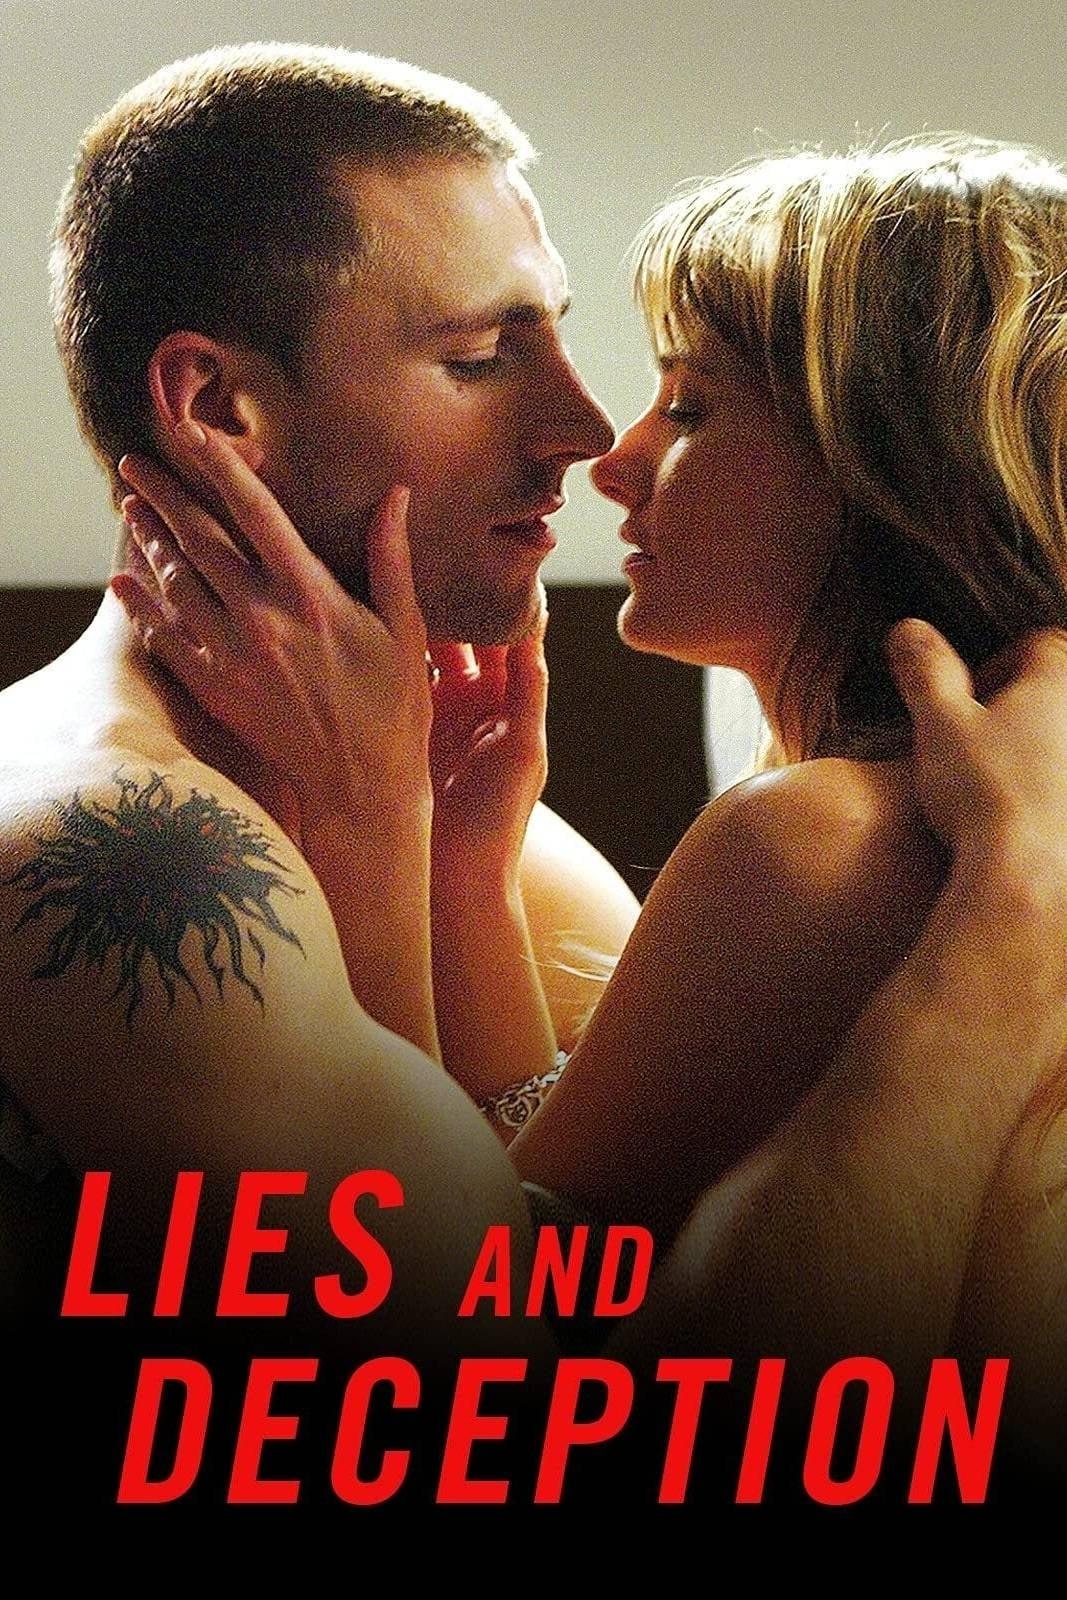 Lies and Deception poster